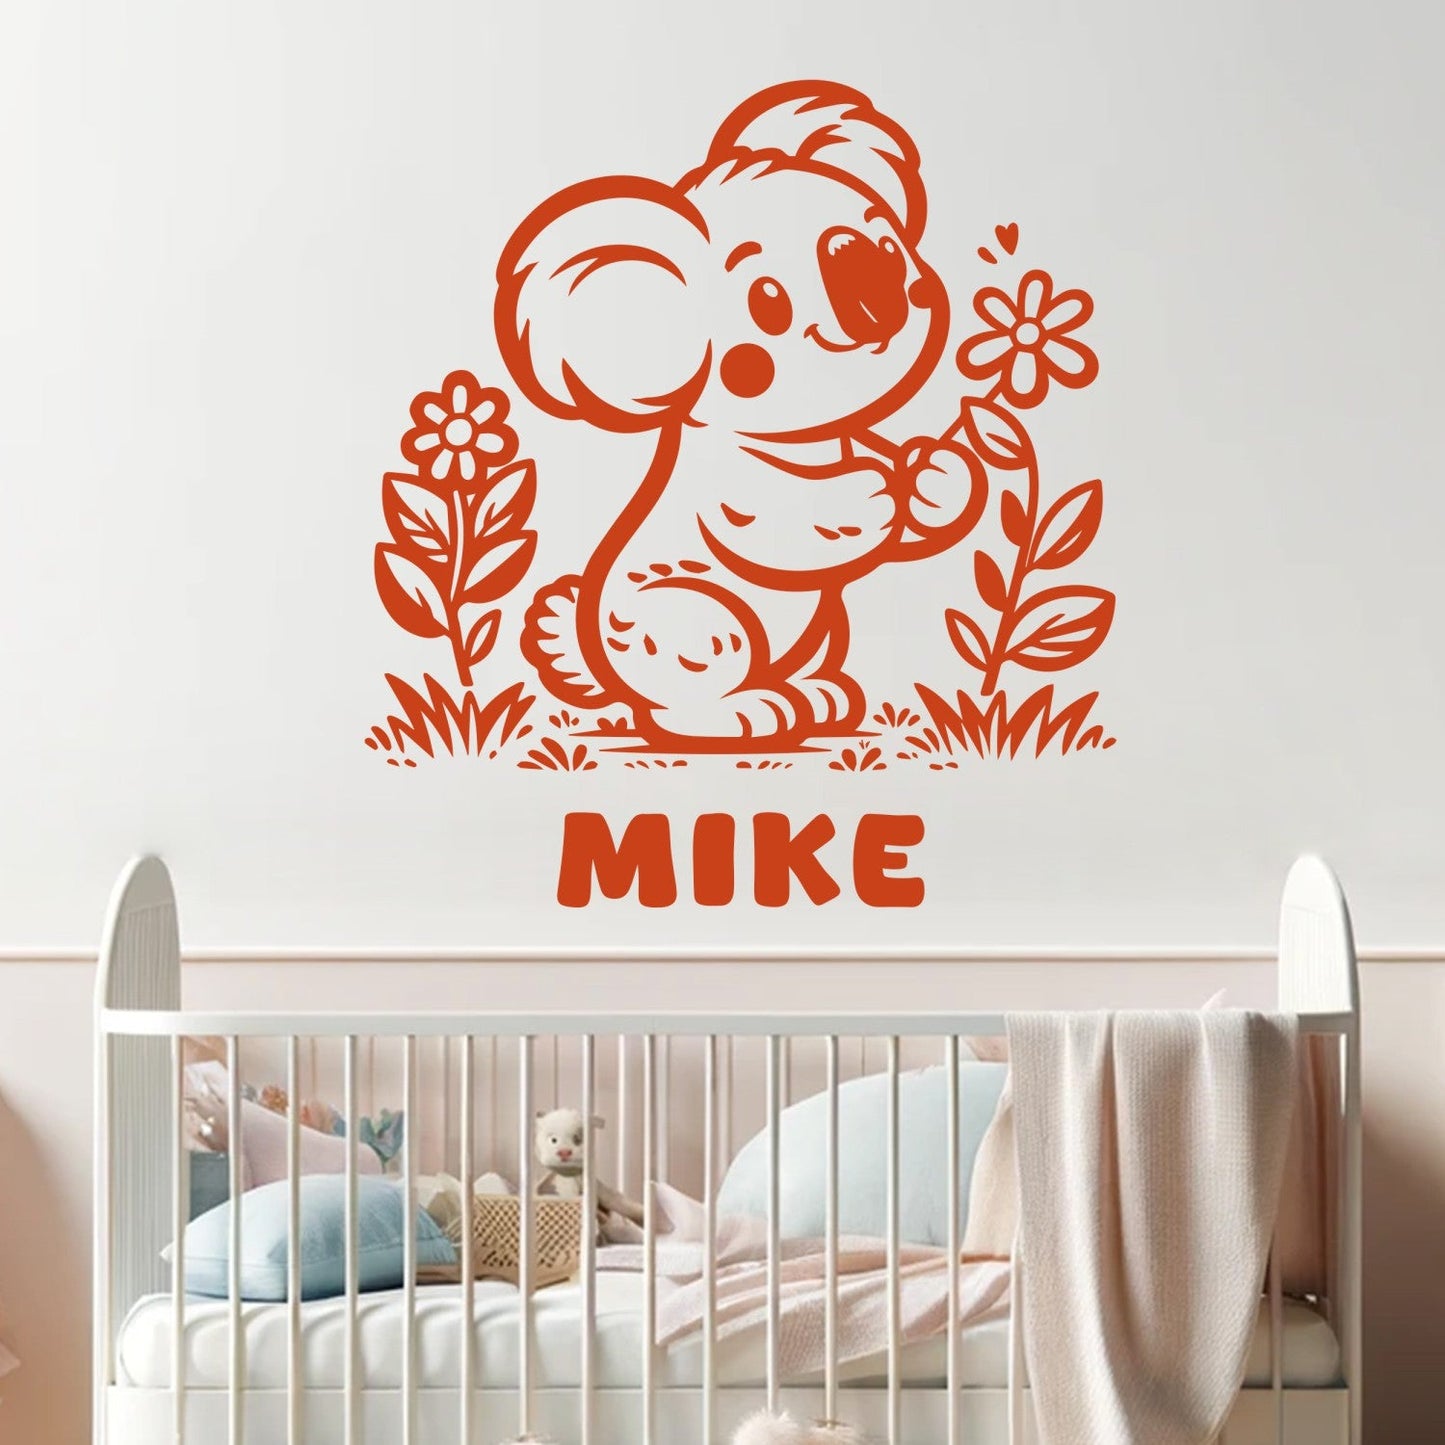 Jungle Animal Wall Decals - Koala Bear Wall Decal - Animal Wall Decals - Animal Wall Decals for Nursery - Personalized Name Stickers for Baby Room